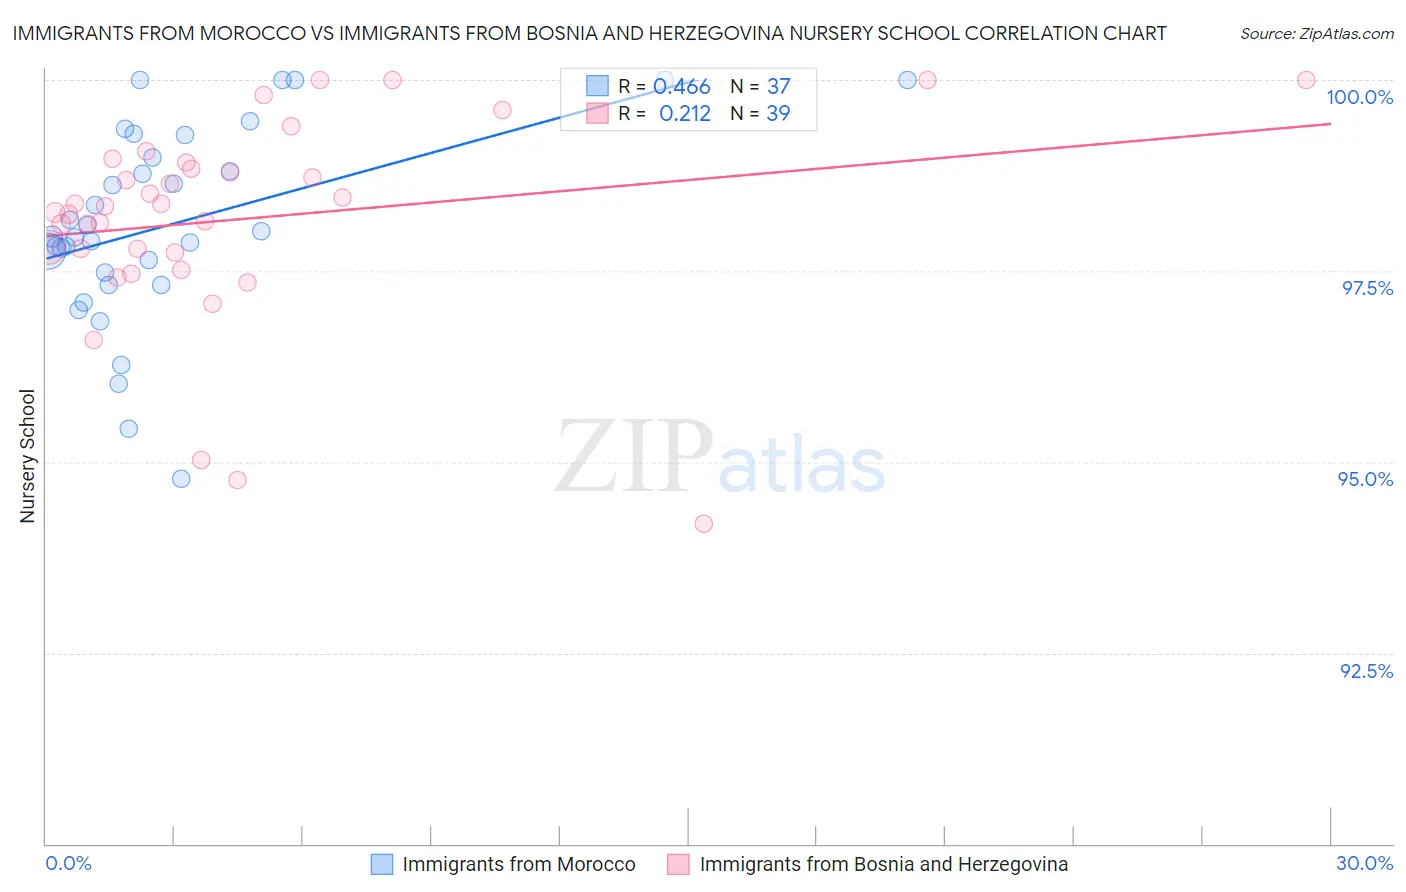 Immigrants from Morocco vs Immigrants from Bosnia and Herzegovina Nursery School